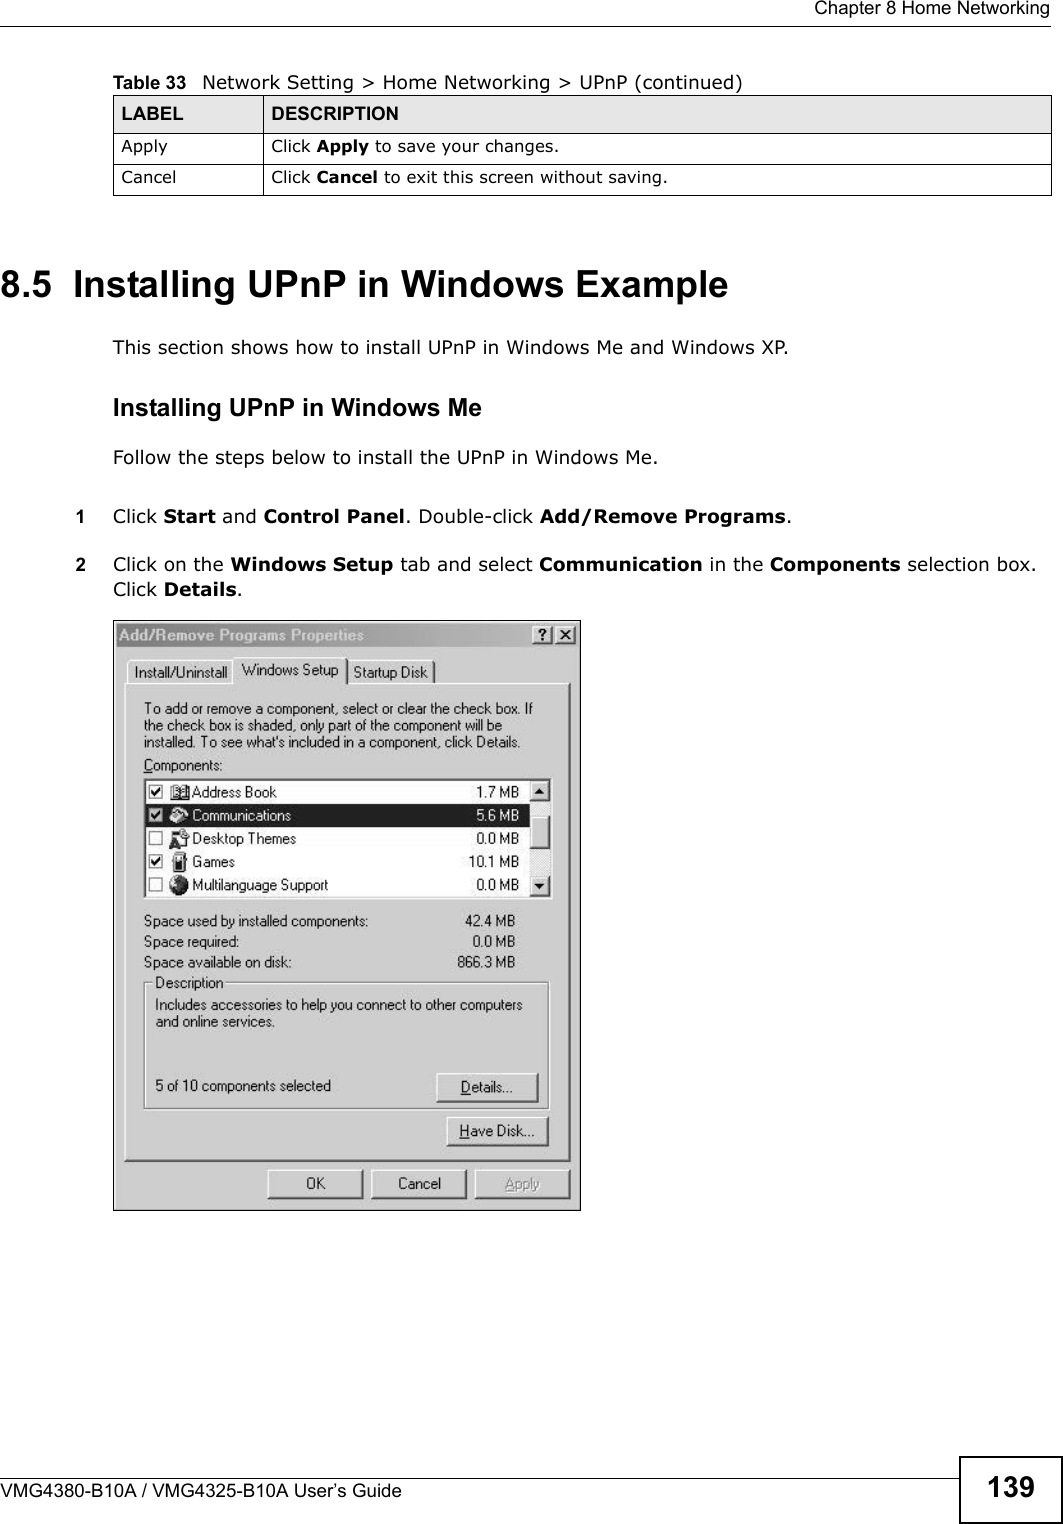 Chapter 8 Home NetworkingVMG4380-B10A / VMG4325-B10A User’s Guide 1398.5  Installing UPnP in Windows ExampleThis section shows how to install UPnP in Windows Me and Windows XP. Installing UPnP in Windows MeFollow the steps below to install the UPnP in Windows Me. 1Click Start and Control Panel. Double-click Add/Remove Programs.2Click on the Windows Setup tab and select Communication in the Components selection box. Click Details. Add/Remove Programs: Window s Setup: CommunicationApply Click Apply to save your changes.Cancel Click Cancel to exit this screen without saving.Table 33   Network Setting &gt; Home Networking &gt; UPnP (continued)LABEL DESCRIPTION